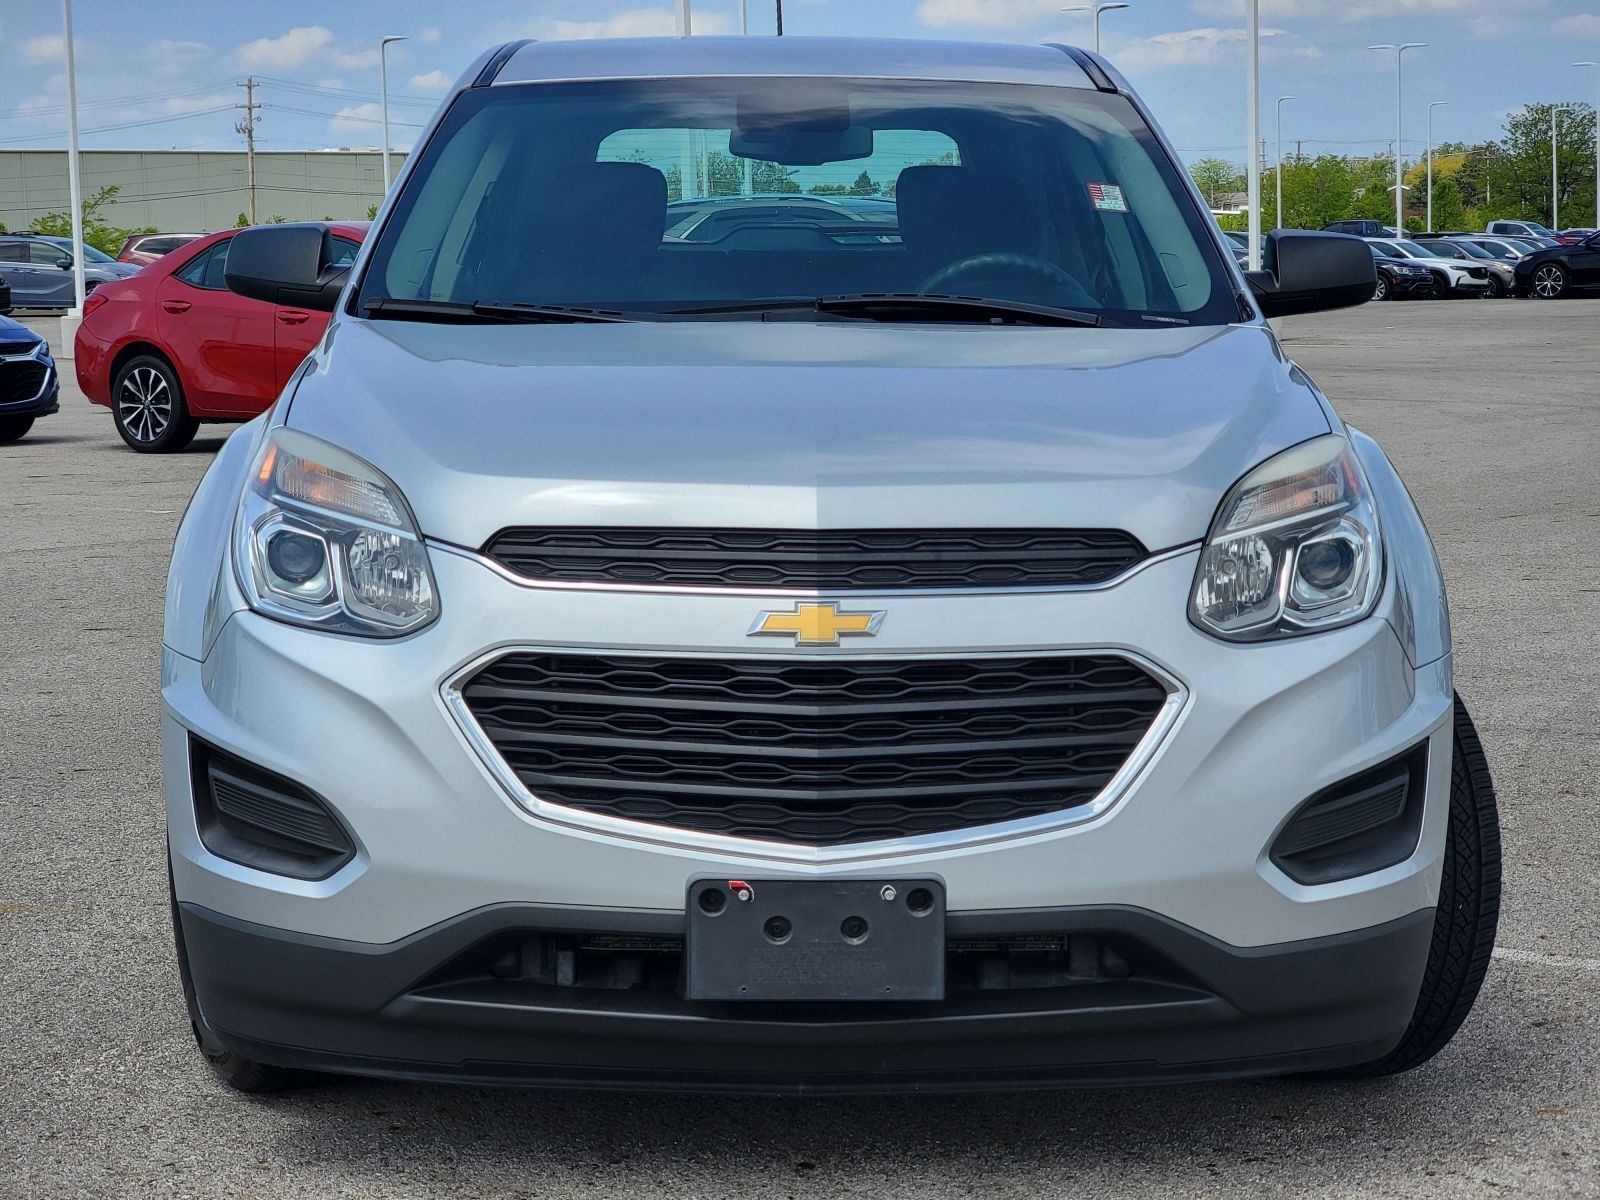 Used, 2017 Chevrolet Equinox FWD 4dr LS, Gray, P0557-8